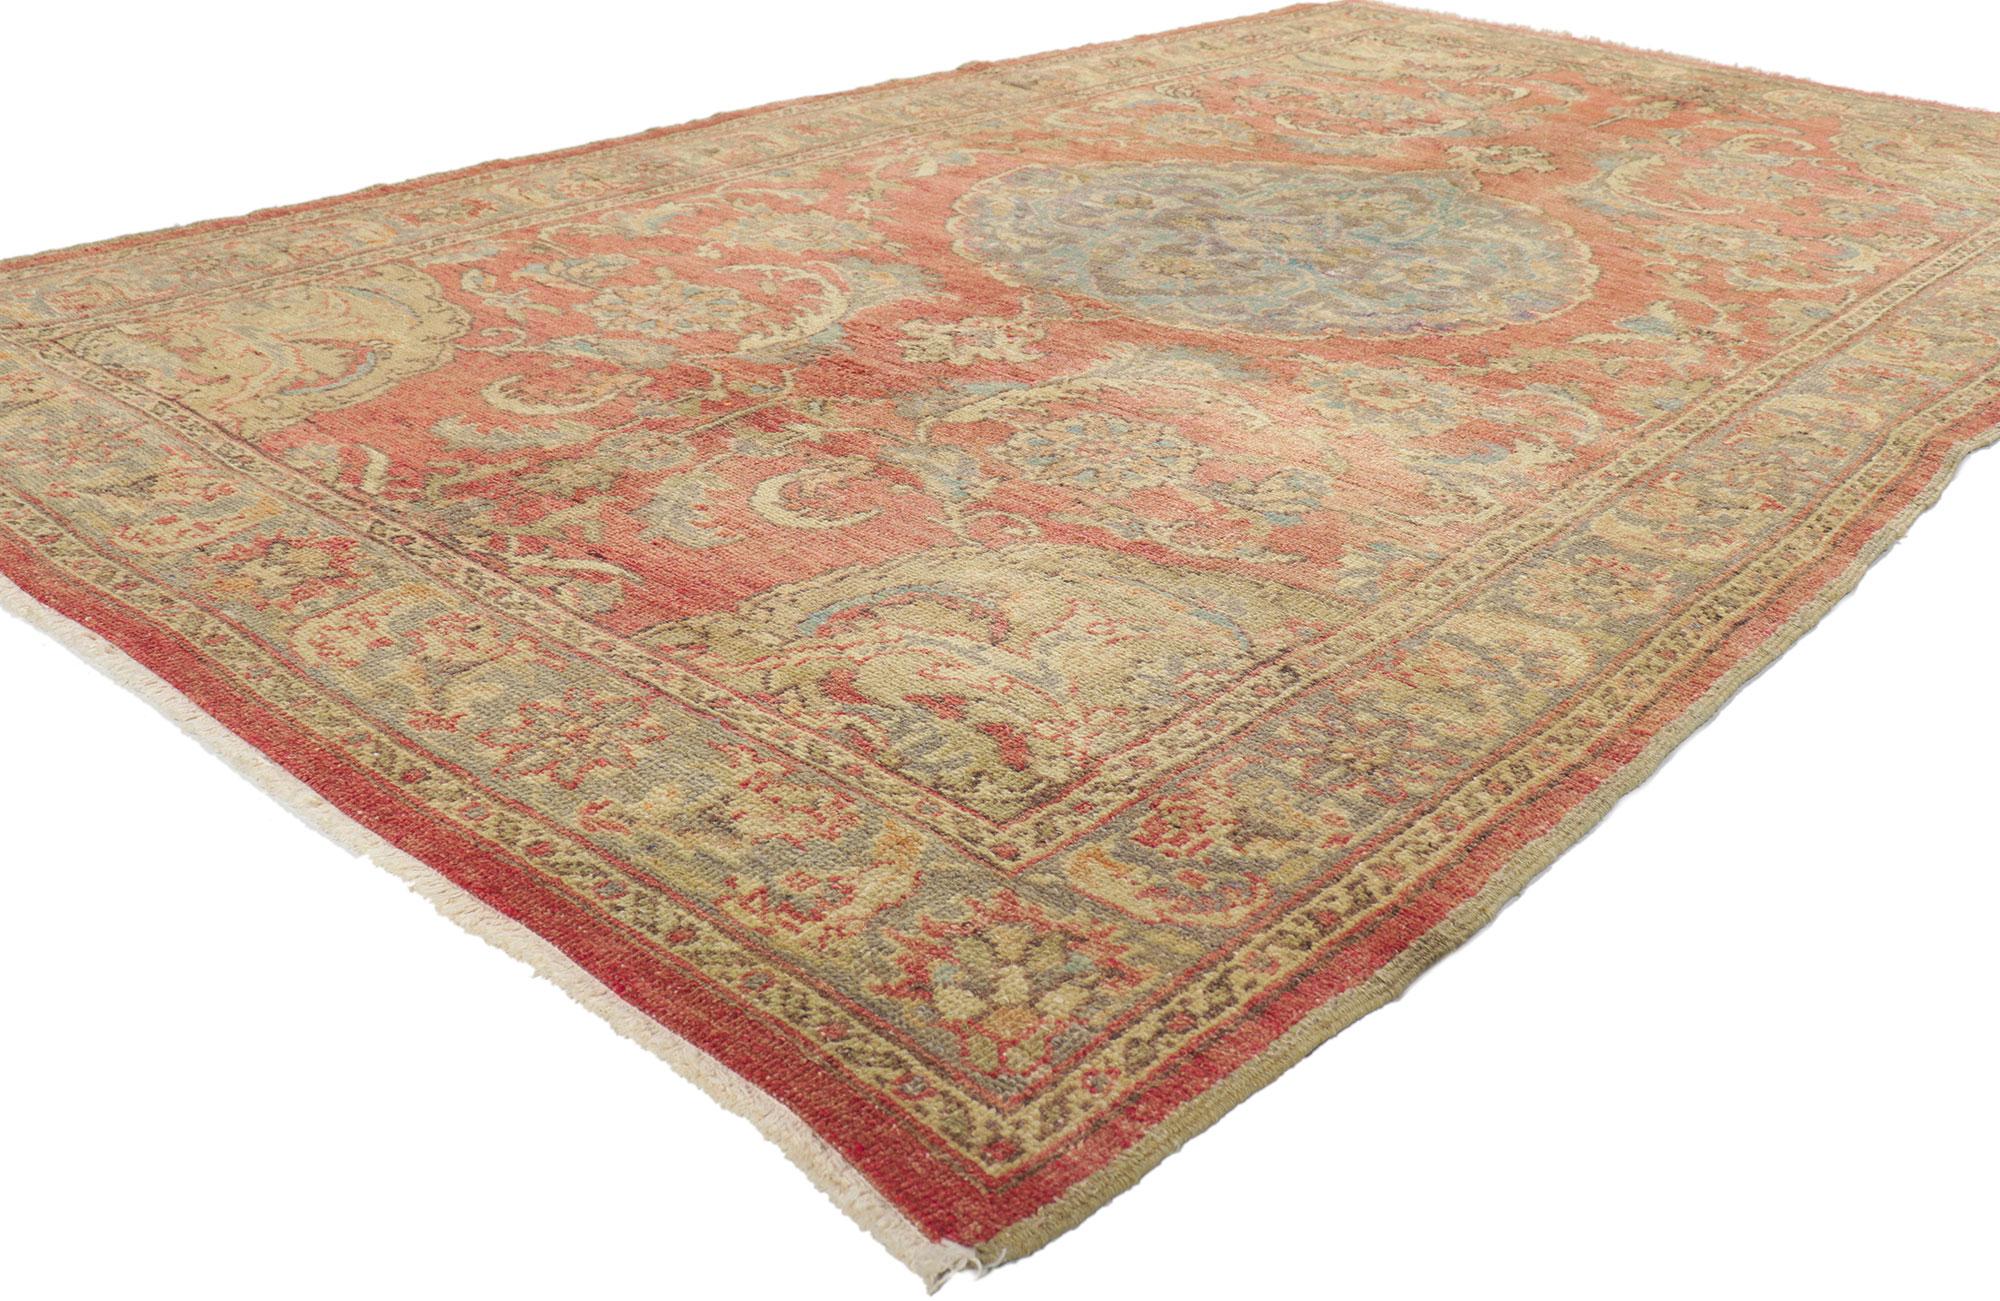 50523 Vintage Turkish Oushak Rug, 05'02 X 08'10.
This hand-knotted wool vintage Turkish Oushak rug features a round scalloped central medallion with palmette pendants floating on an abrashed terra cotta field. Large open blossoms, palmettes, vinery